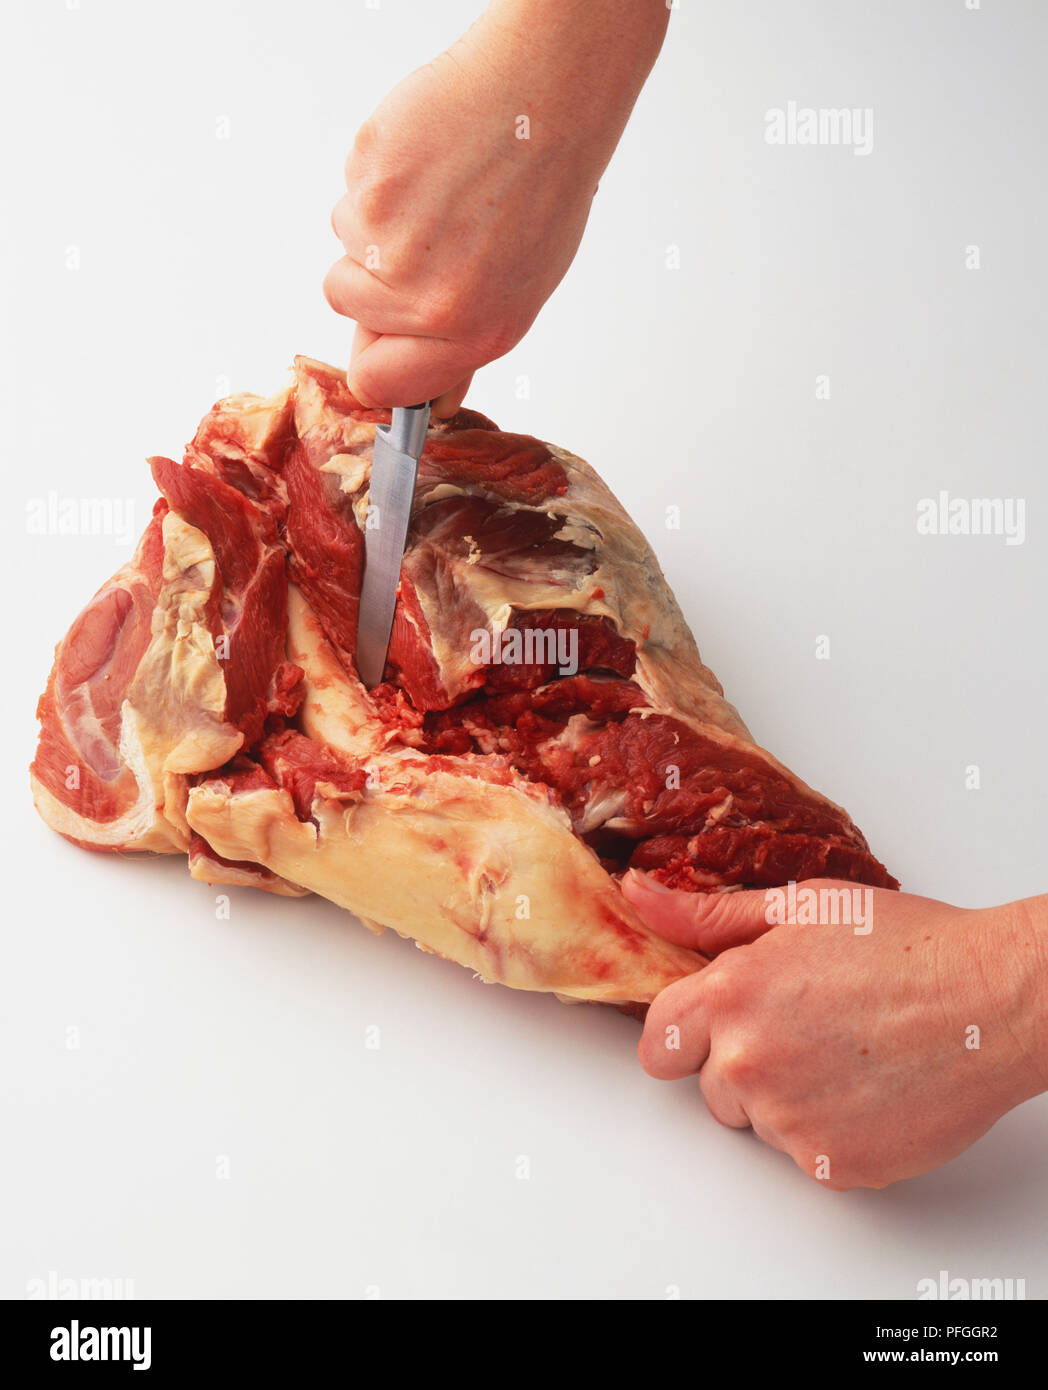 Raw lamb meat being scraped away from the leg bone with knife, view from above. Stock Photo